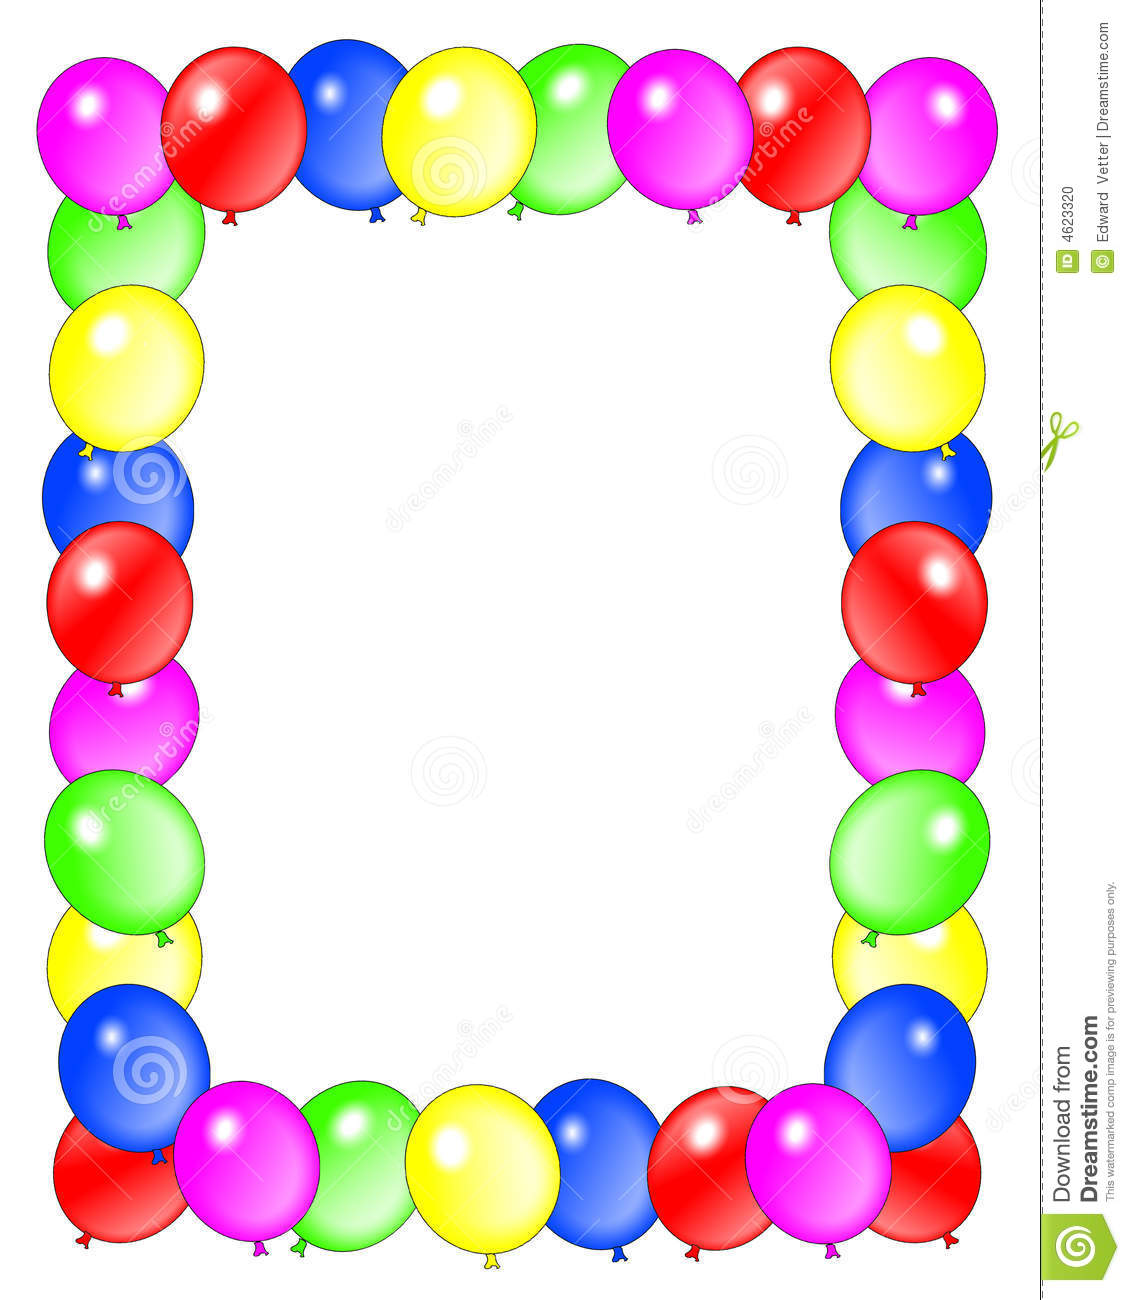 birthday clipart picture frame